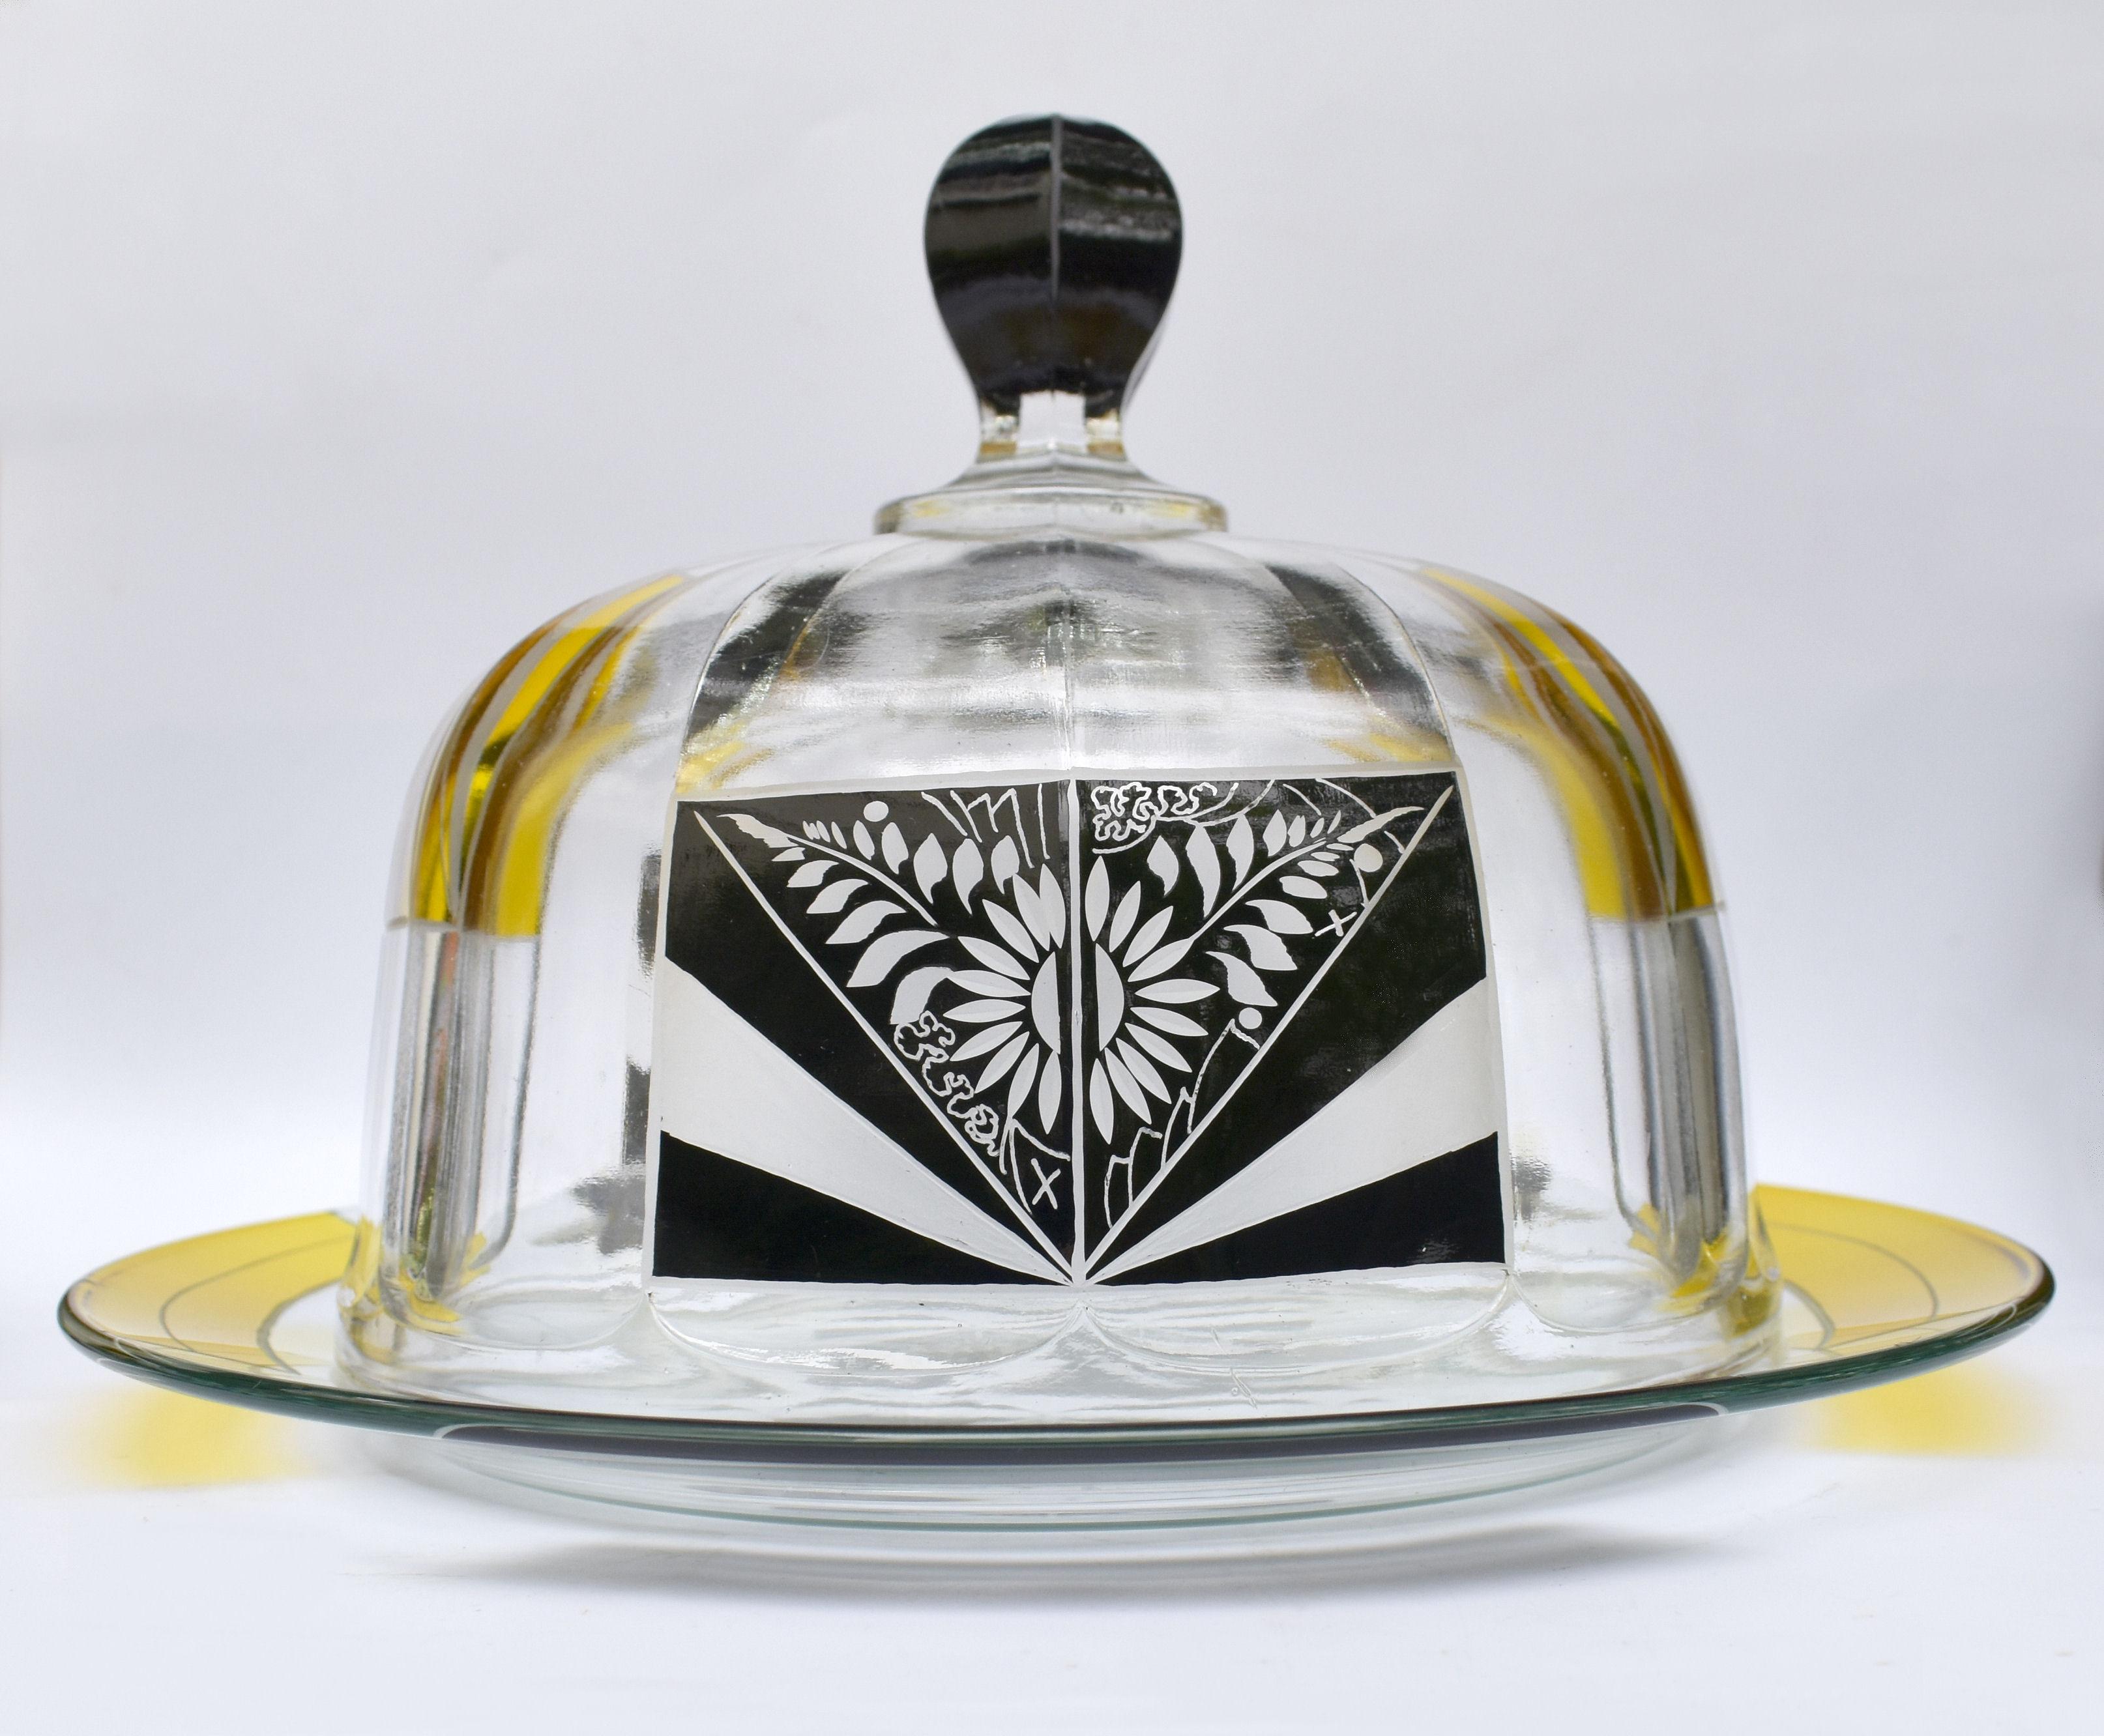 Rather unusual as we've not come across one of these before from this style is this Cheese/ butter dish but could be used for other foods to preserve such as cake. A large domed cover in cut glass covers a circular plate underneath. The whole piece